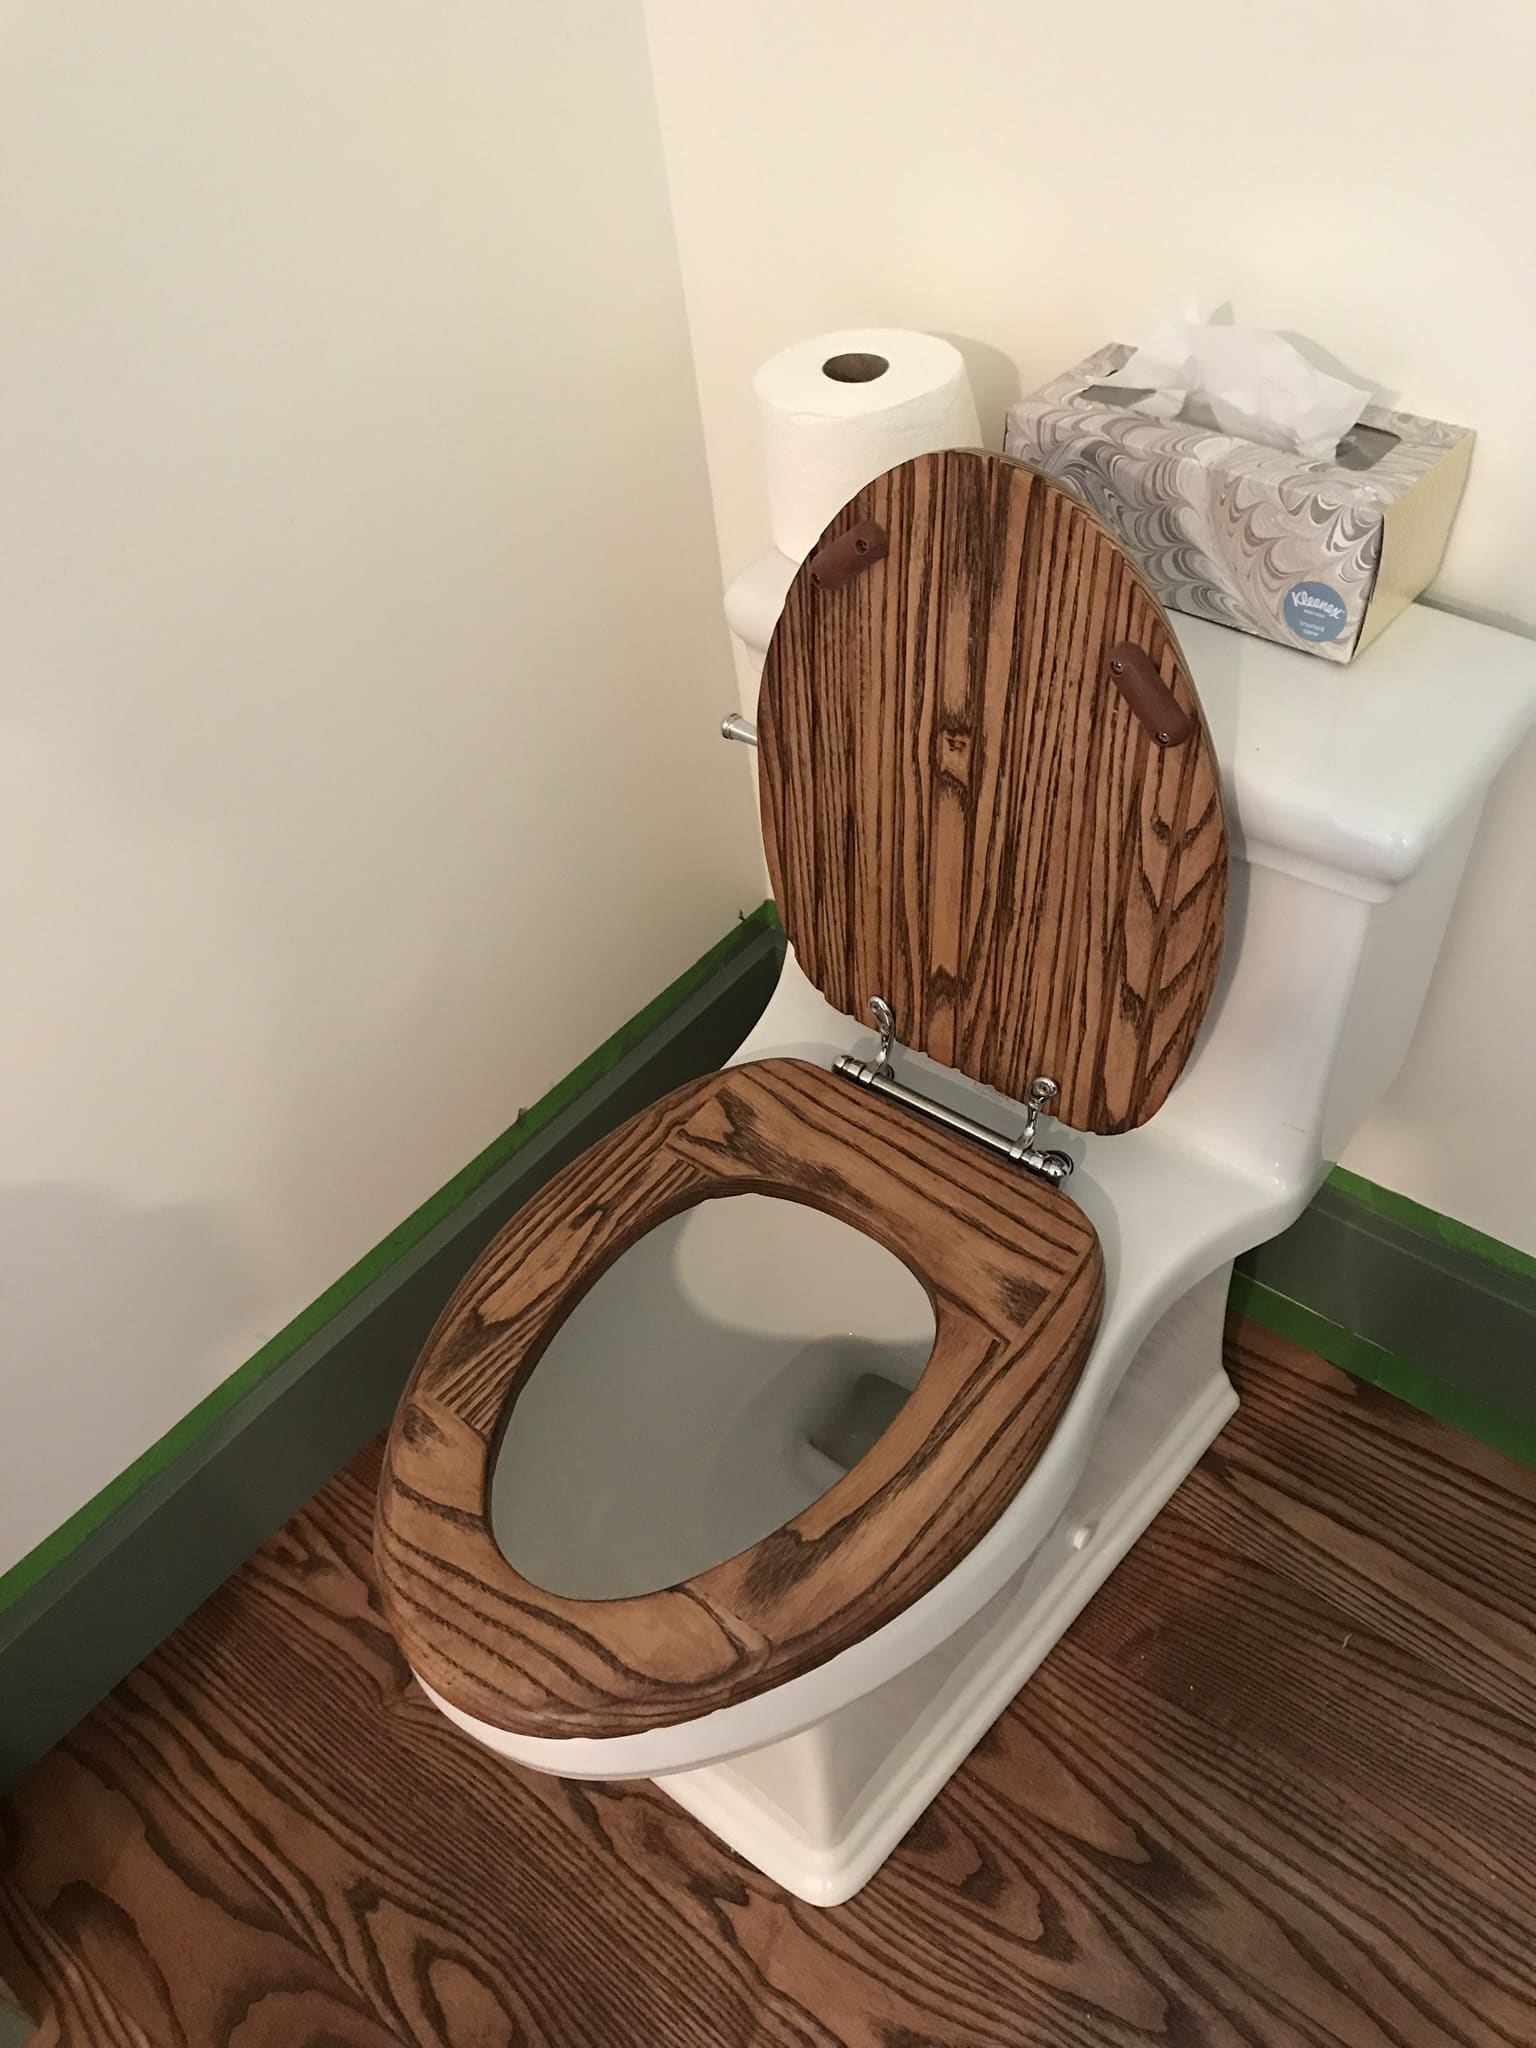 Toilet Seat by donhatch